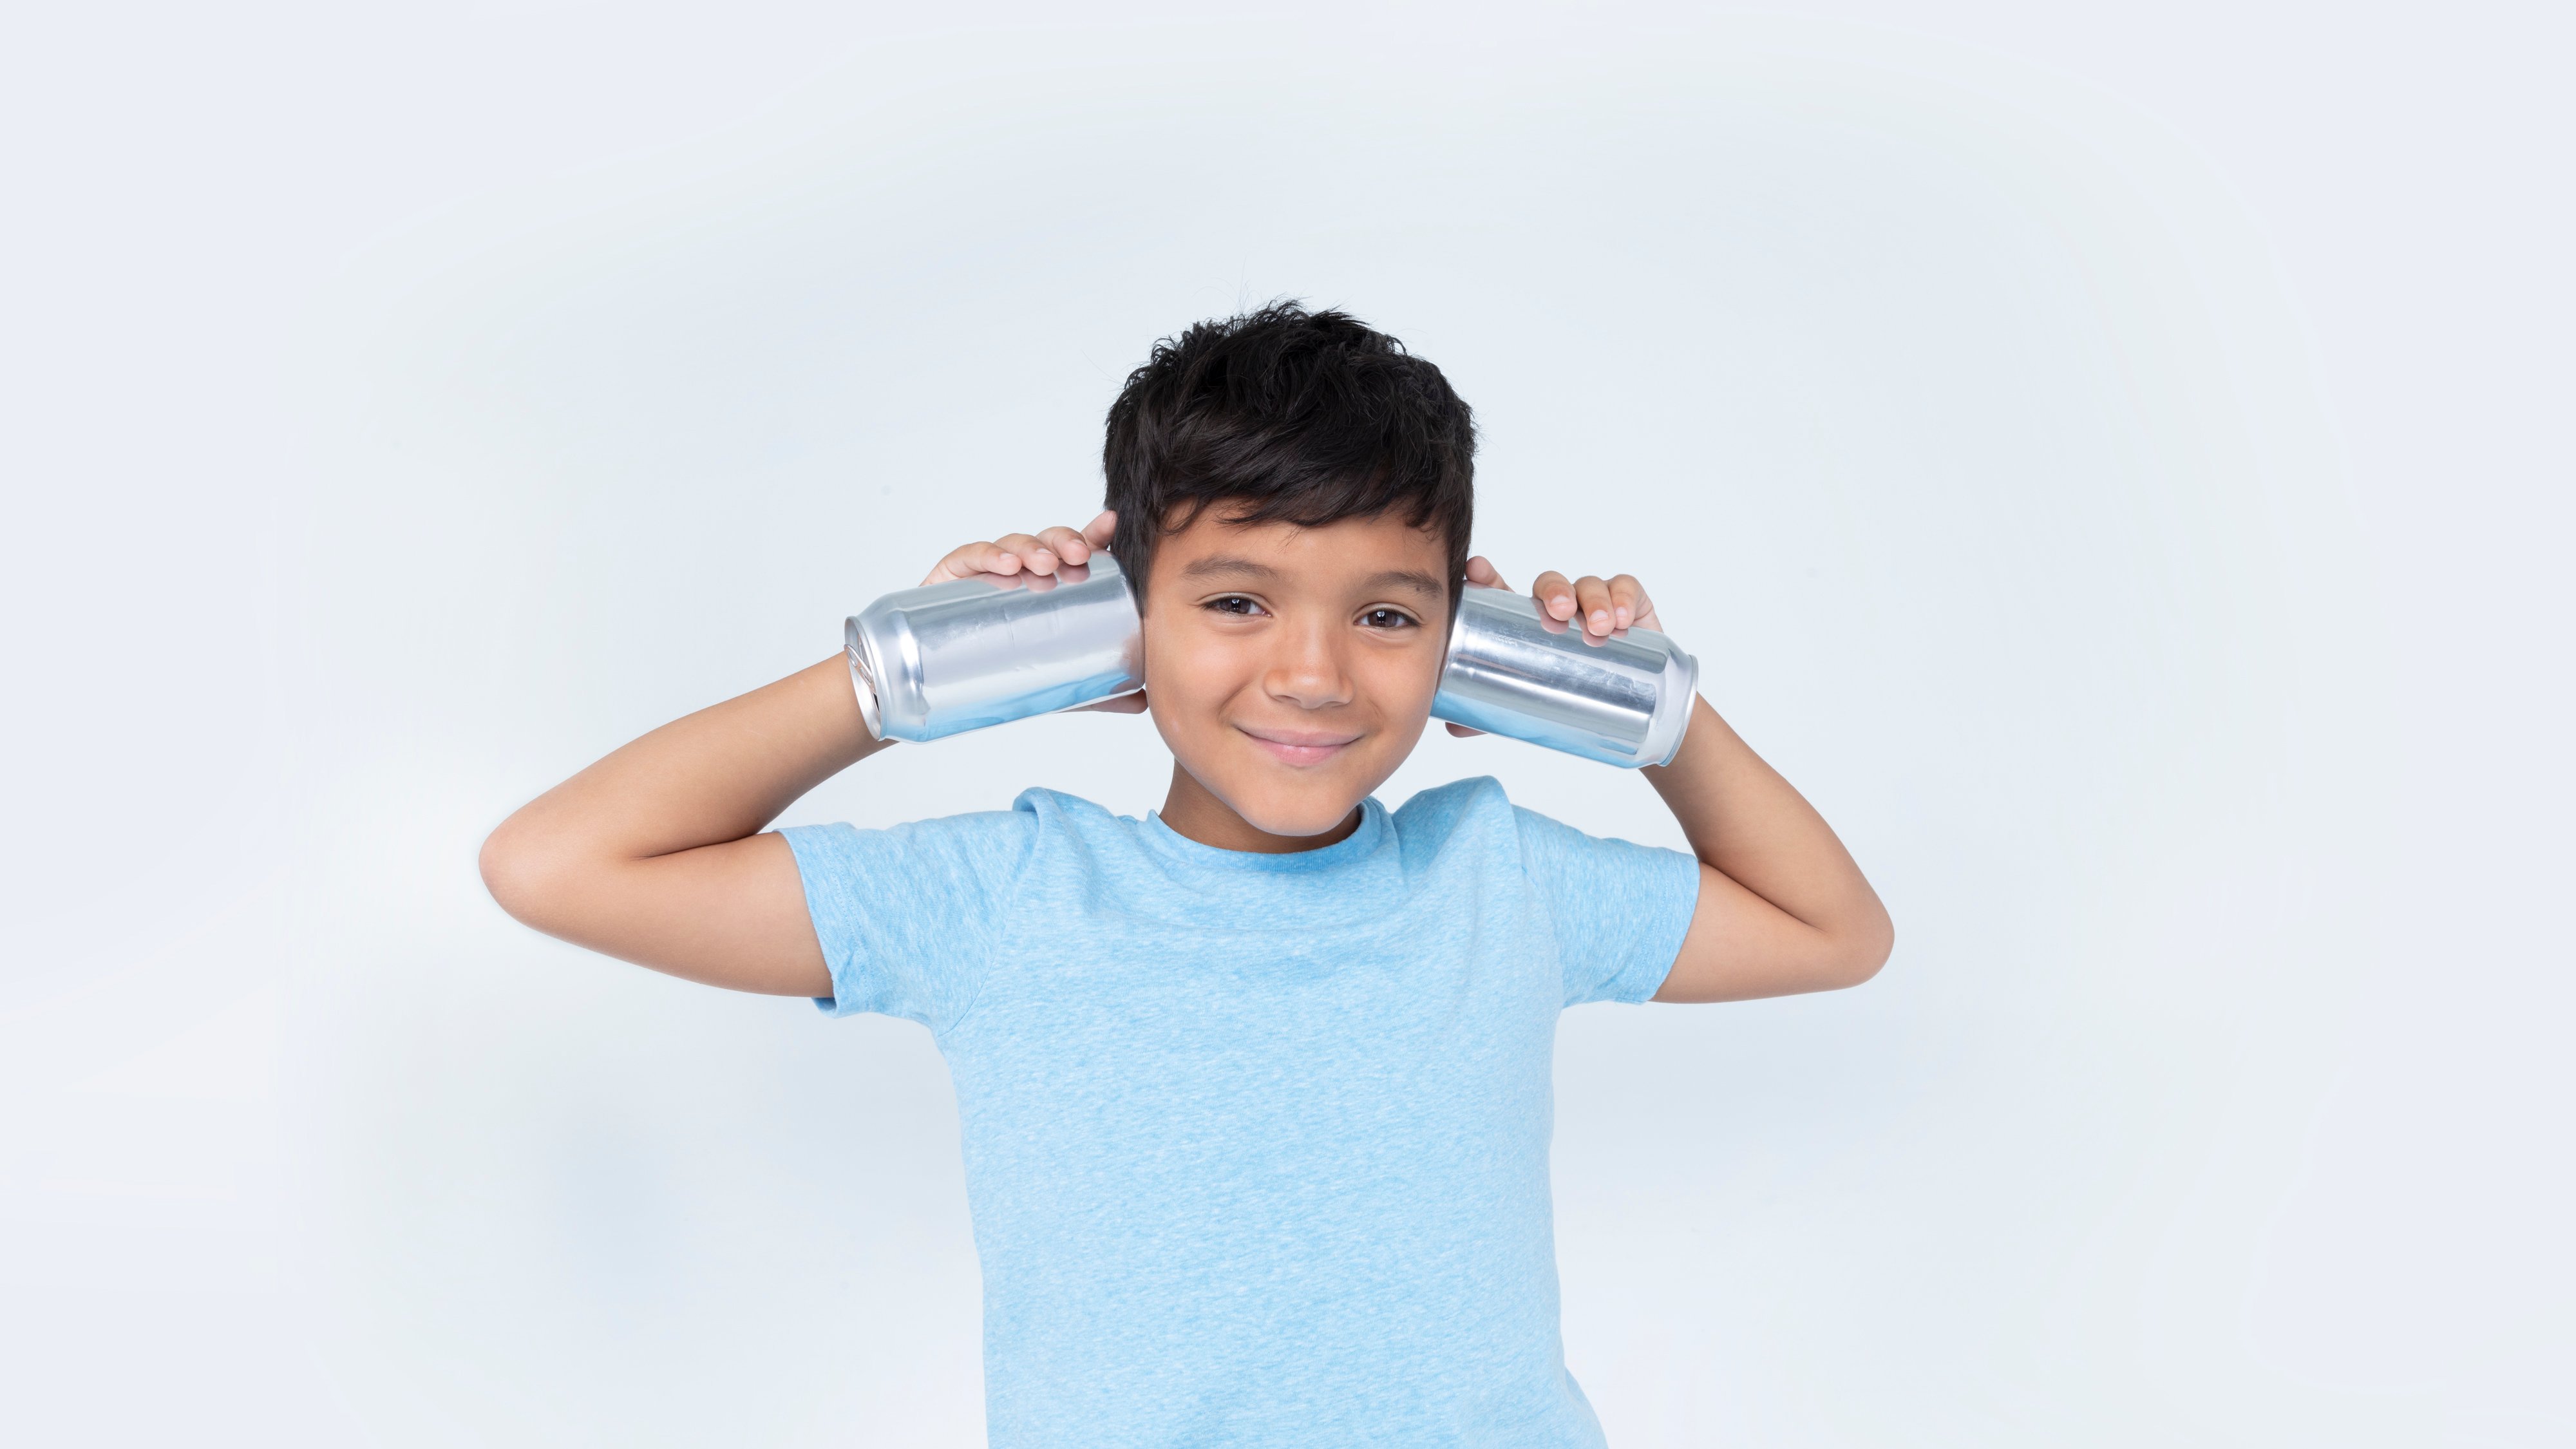 Image of boy with cans